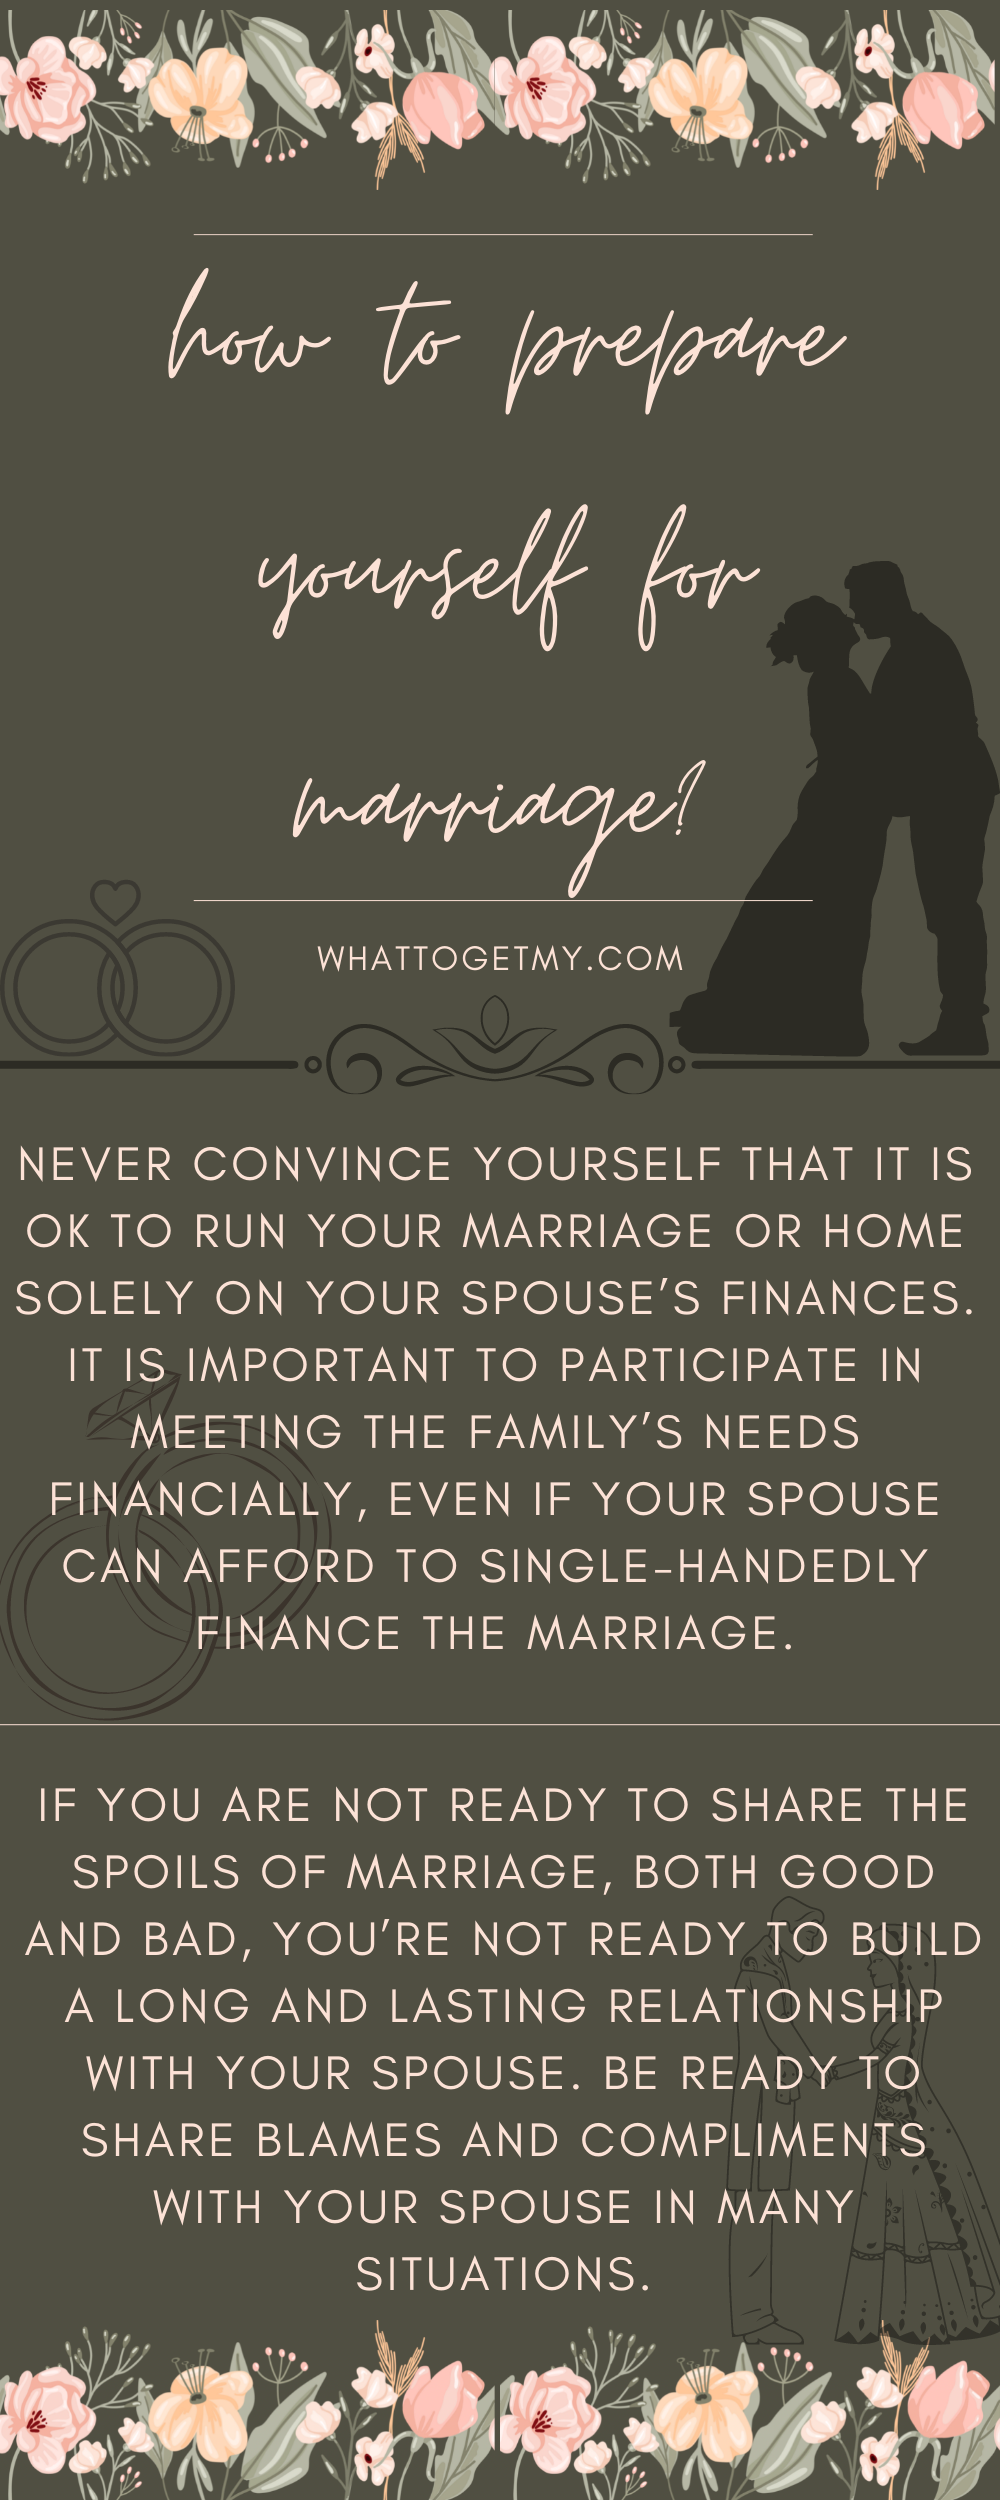 How to prepare yourself for marriage?